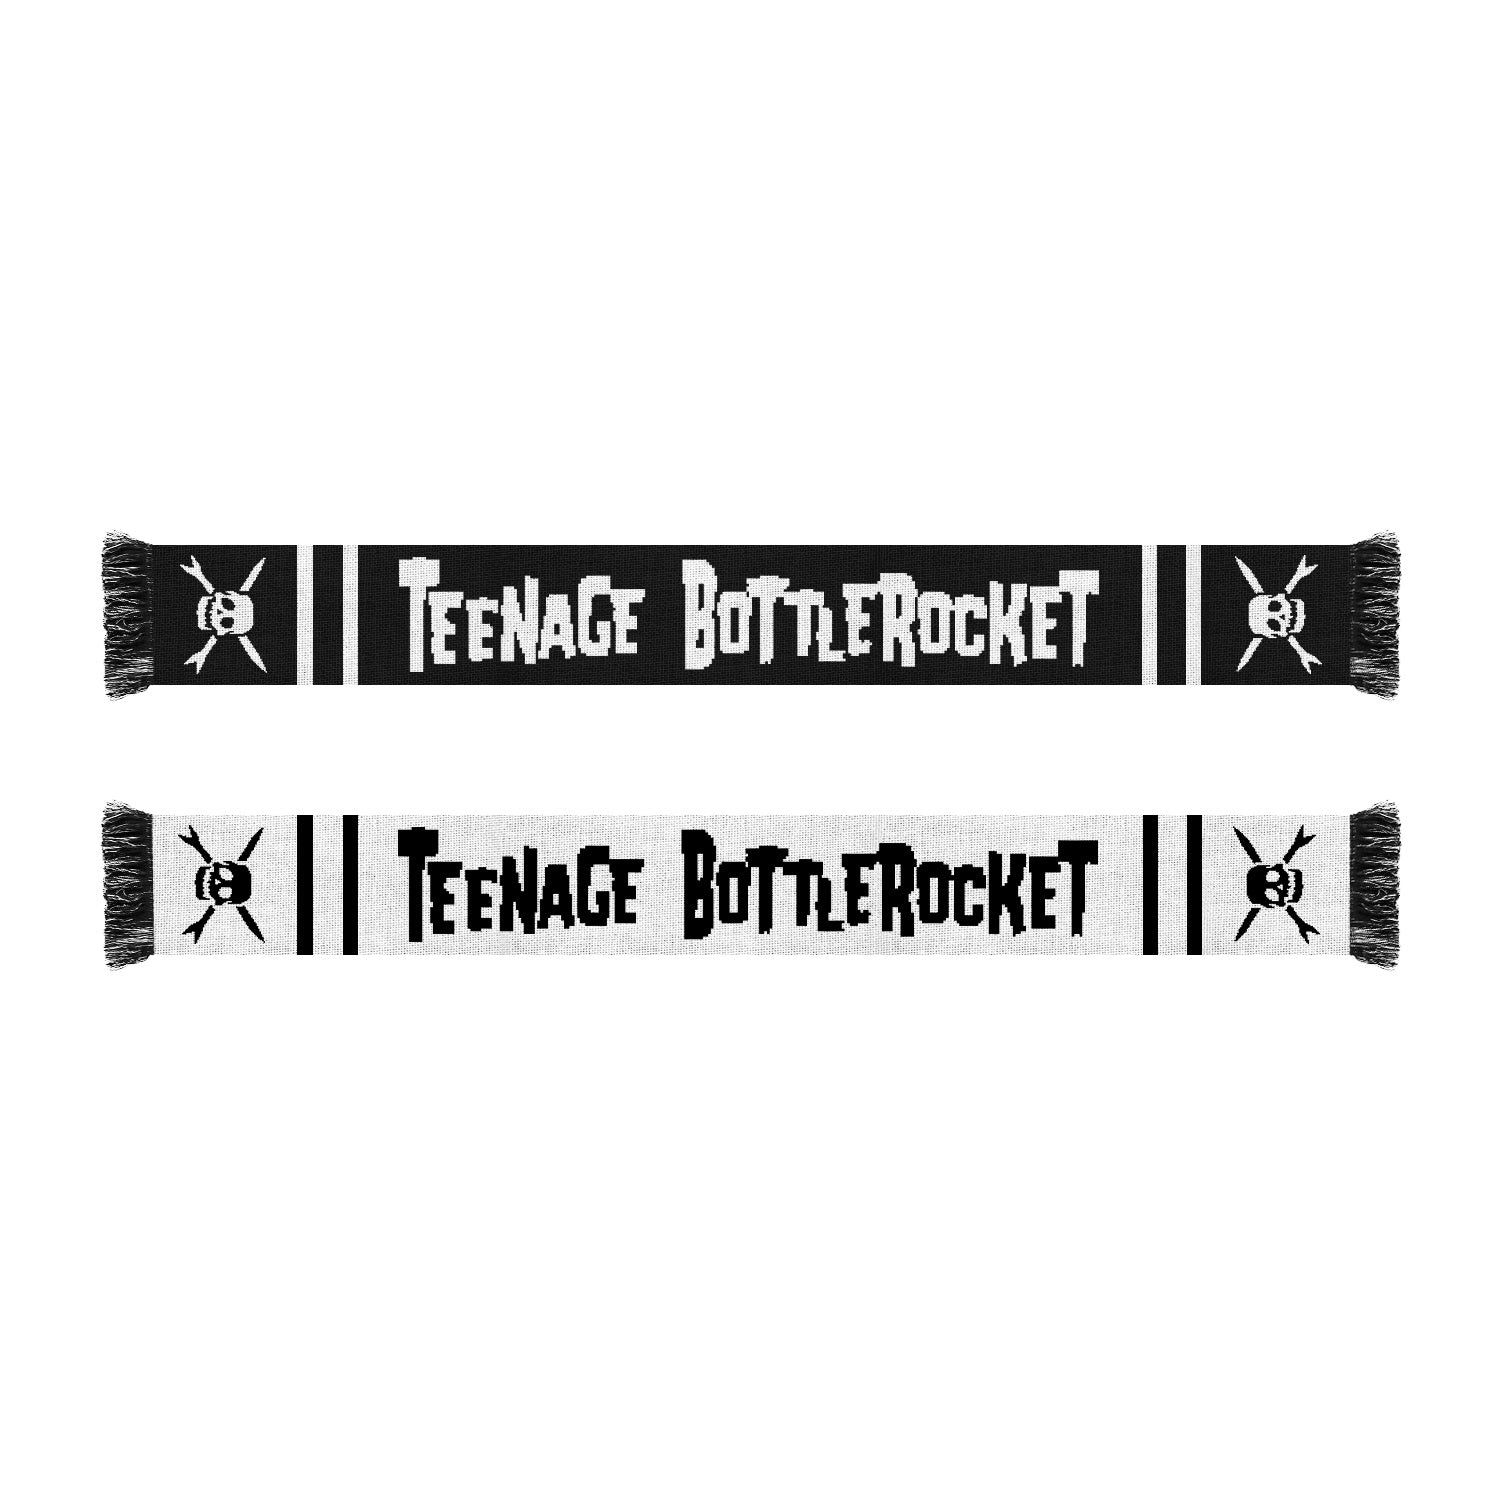 image of the front and back of a custom knit scarf on a white background. front of the scarf is on the top and is black with white text that says teenage bottlerocket. each end by the fringe has a skull. the back of the scarf is on the bottom of the image and is white with black text that says teenage bottle rocket and has black skulls by each fringed edge